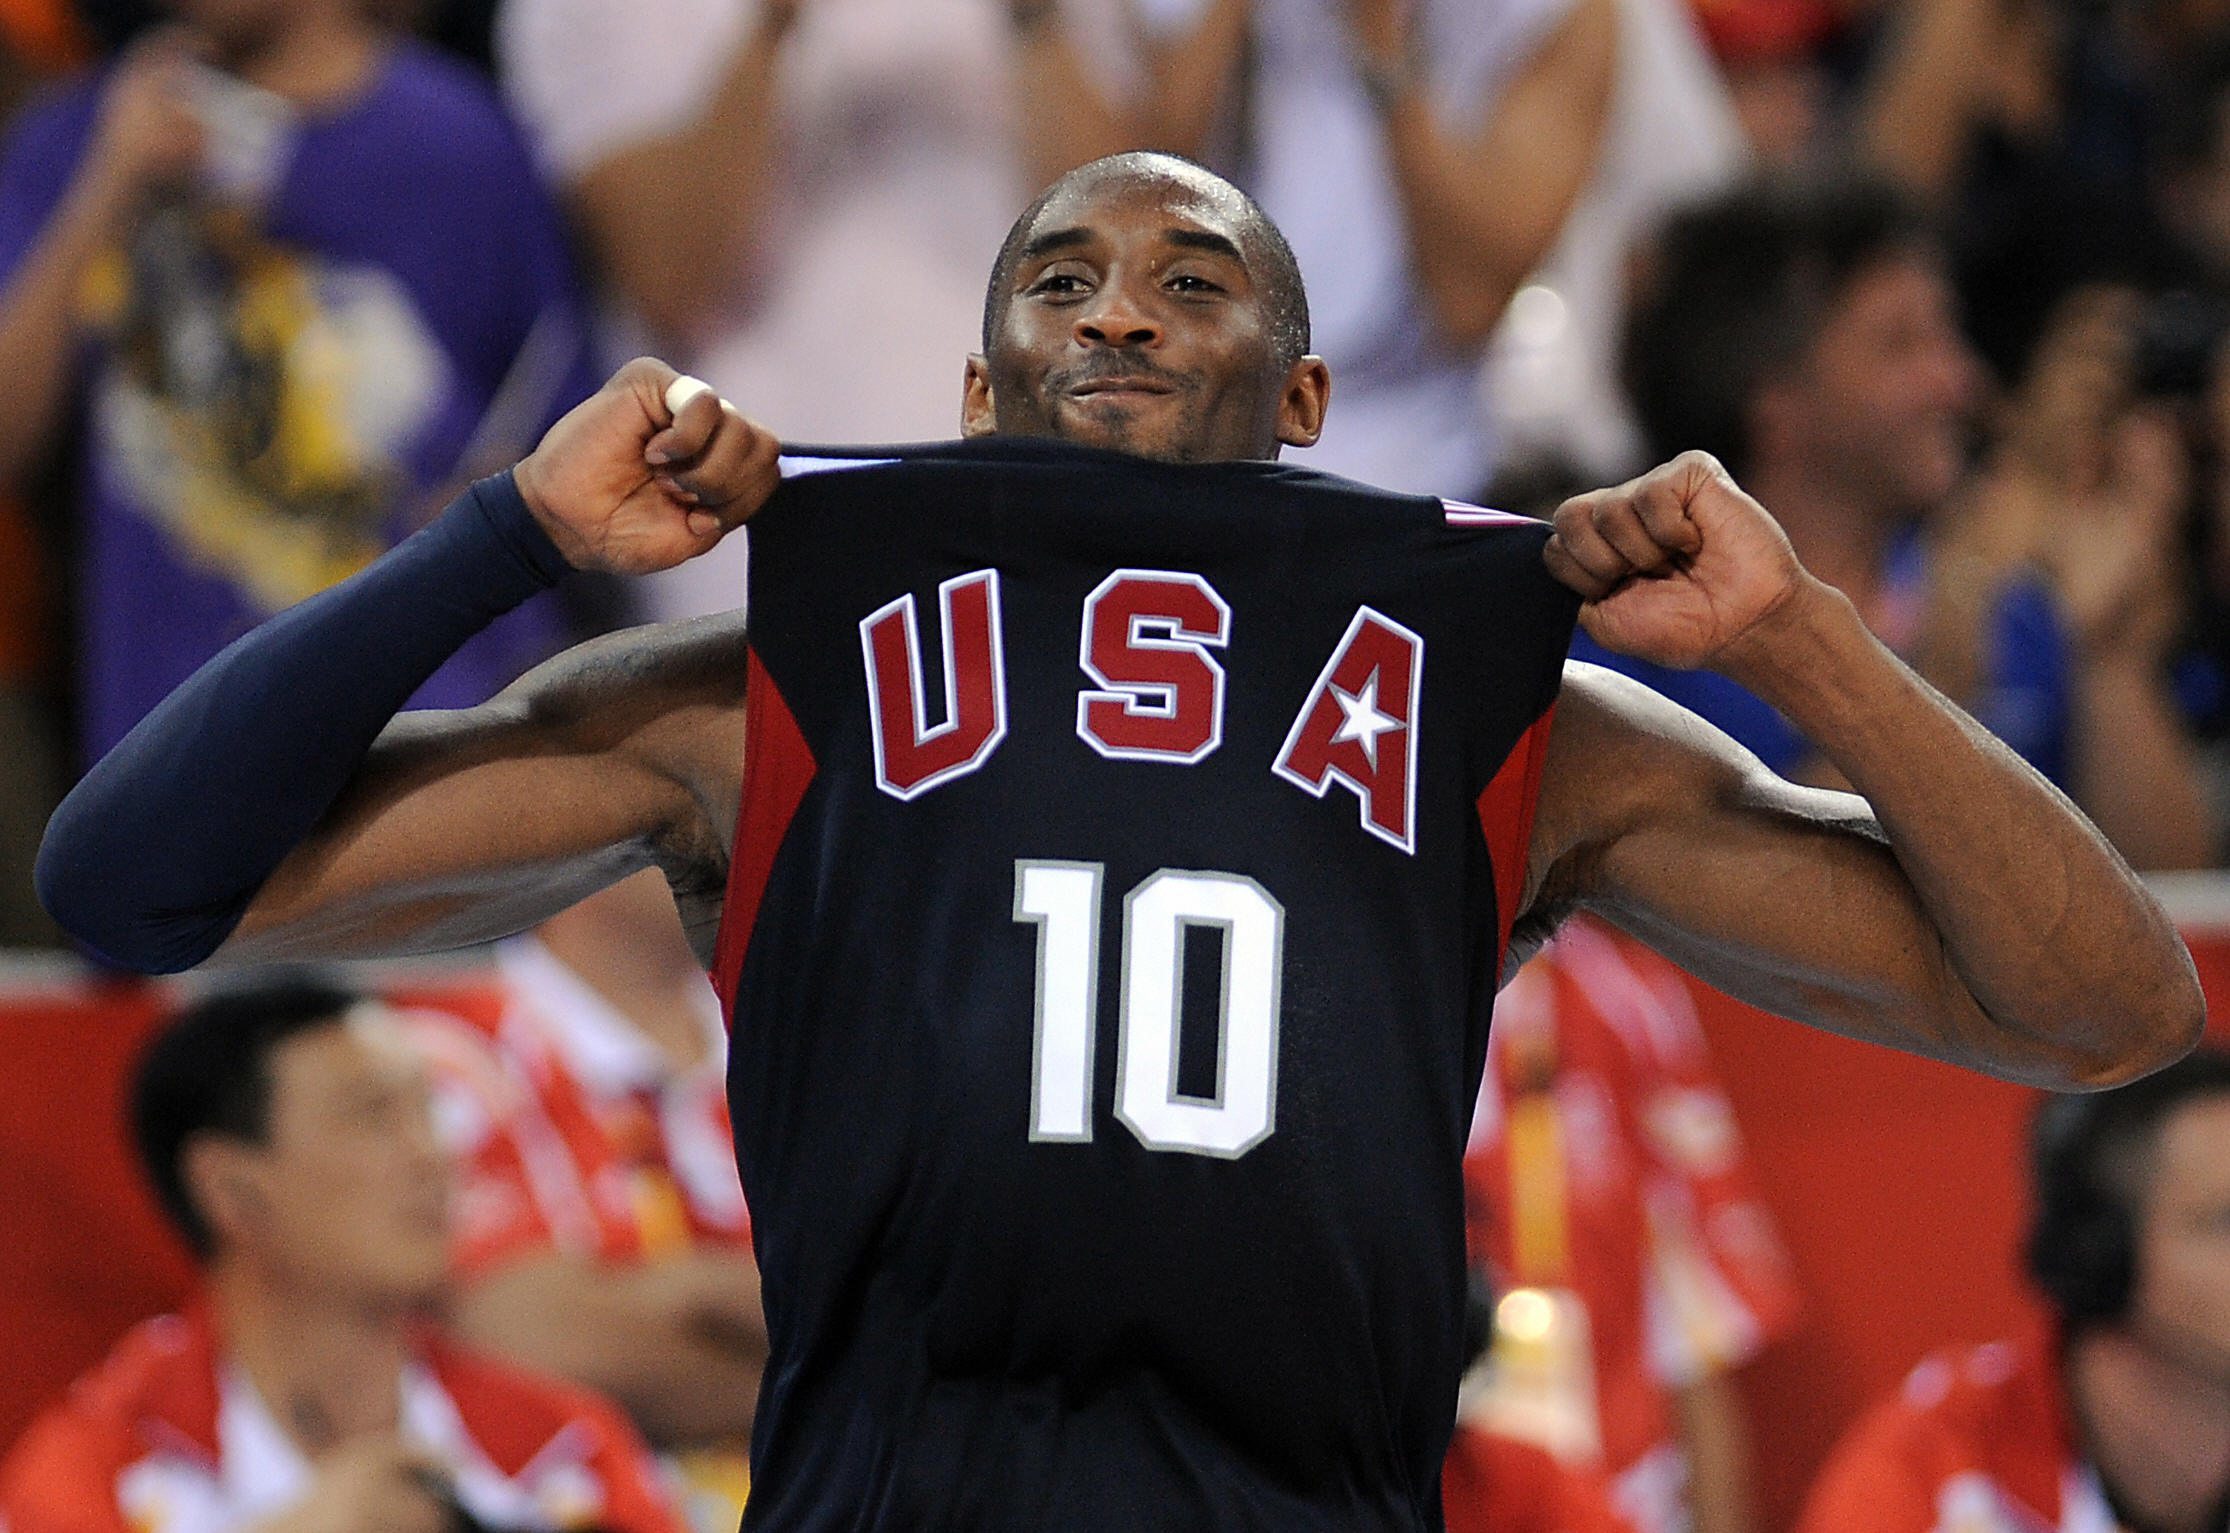 Kobe Bryant S Hall Of Fame Legacy Includes His Olympic Excellence Mike Sielski